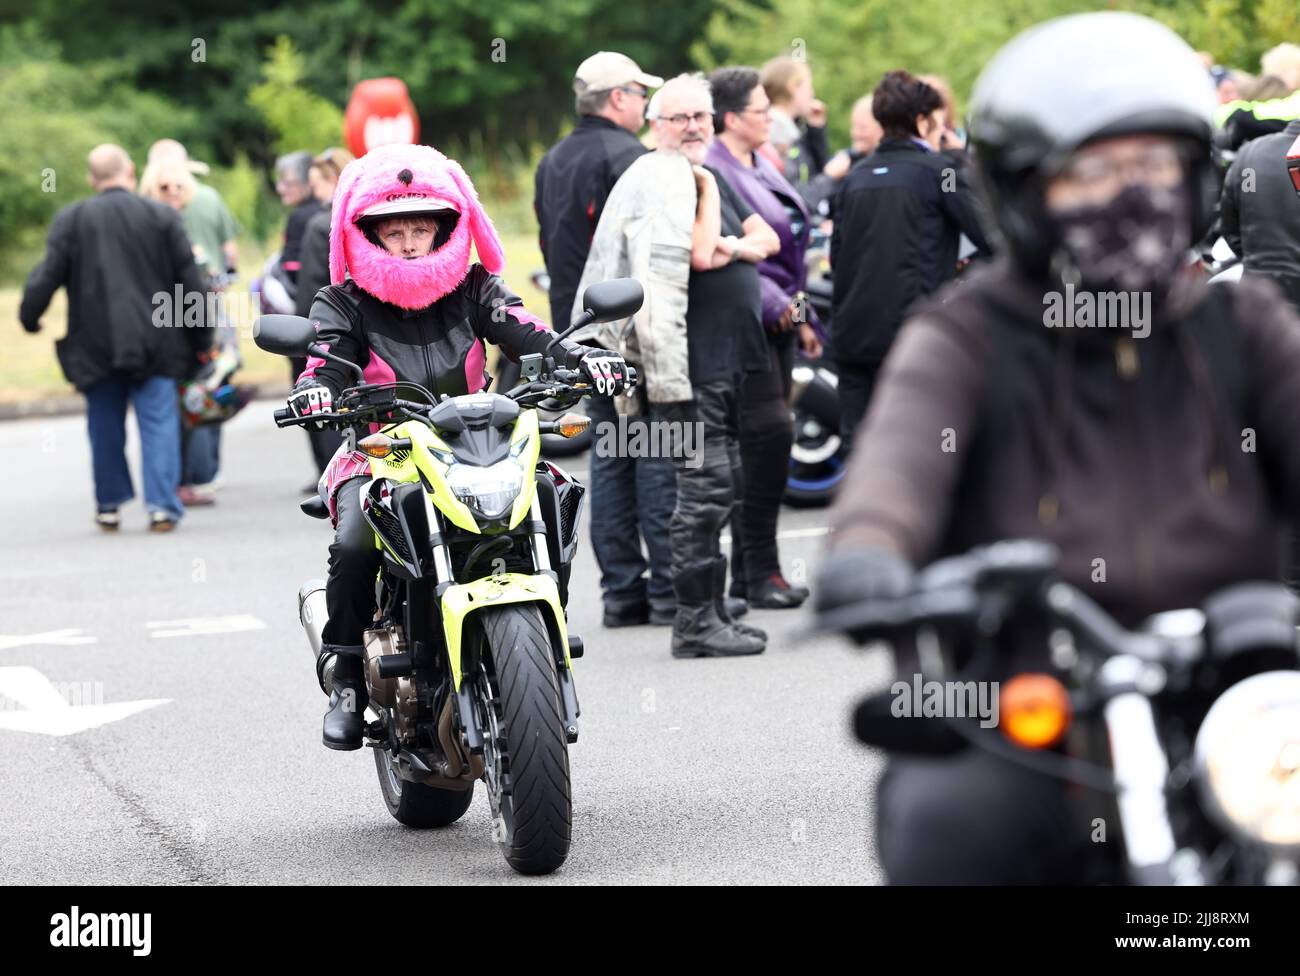 Hinckley, Leicestershire, UK. 24th July 2022. A rider in a pink fluffy bike helmet arrives during a World Record attempt for the largest Female biker meet at the global headquarters for Triumph Motorcycles. Credit Darren Staples/Alamy Live News. Stock Photo